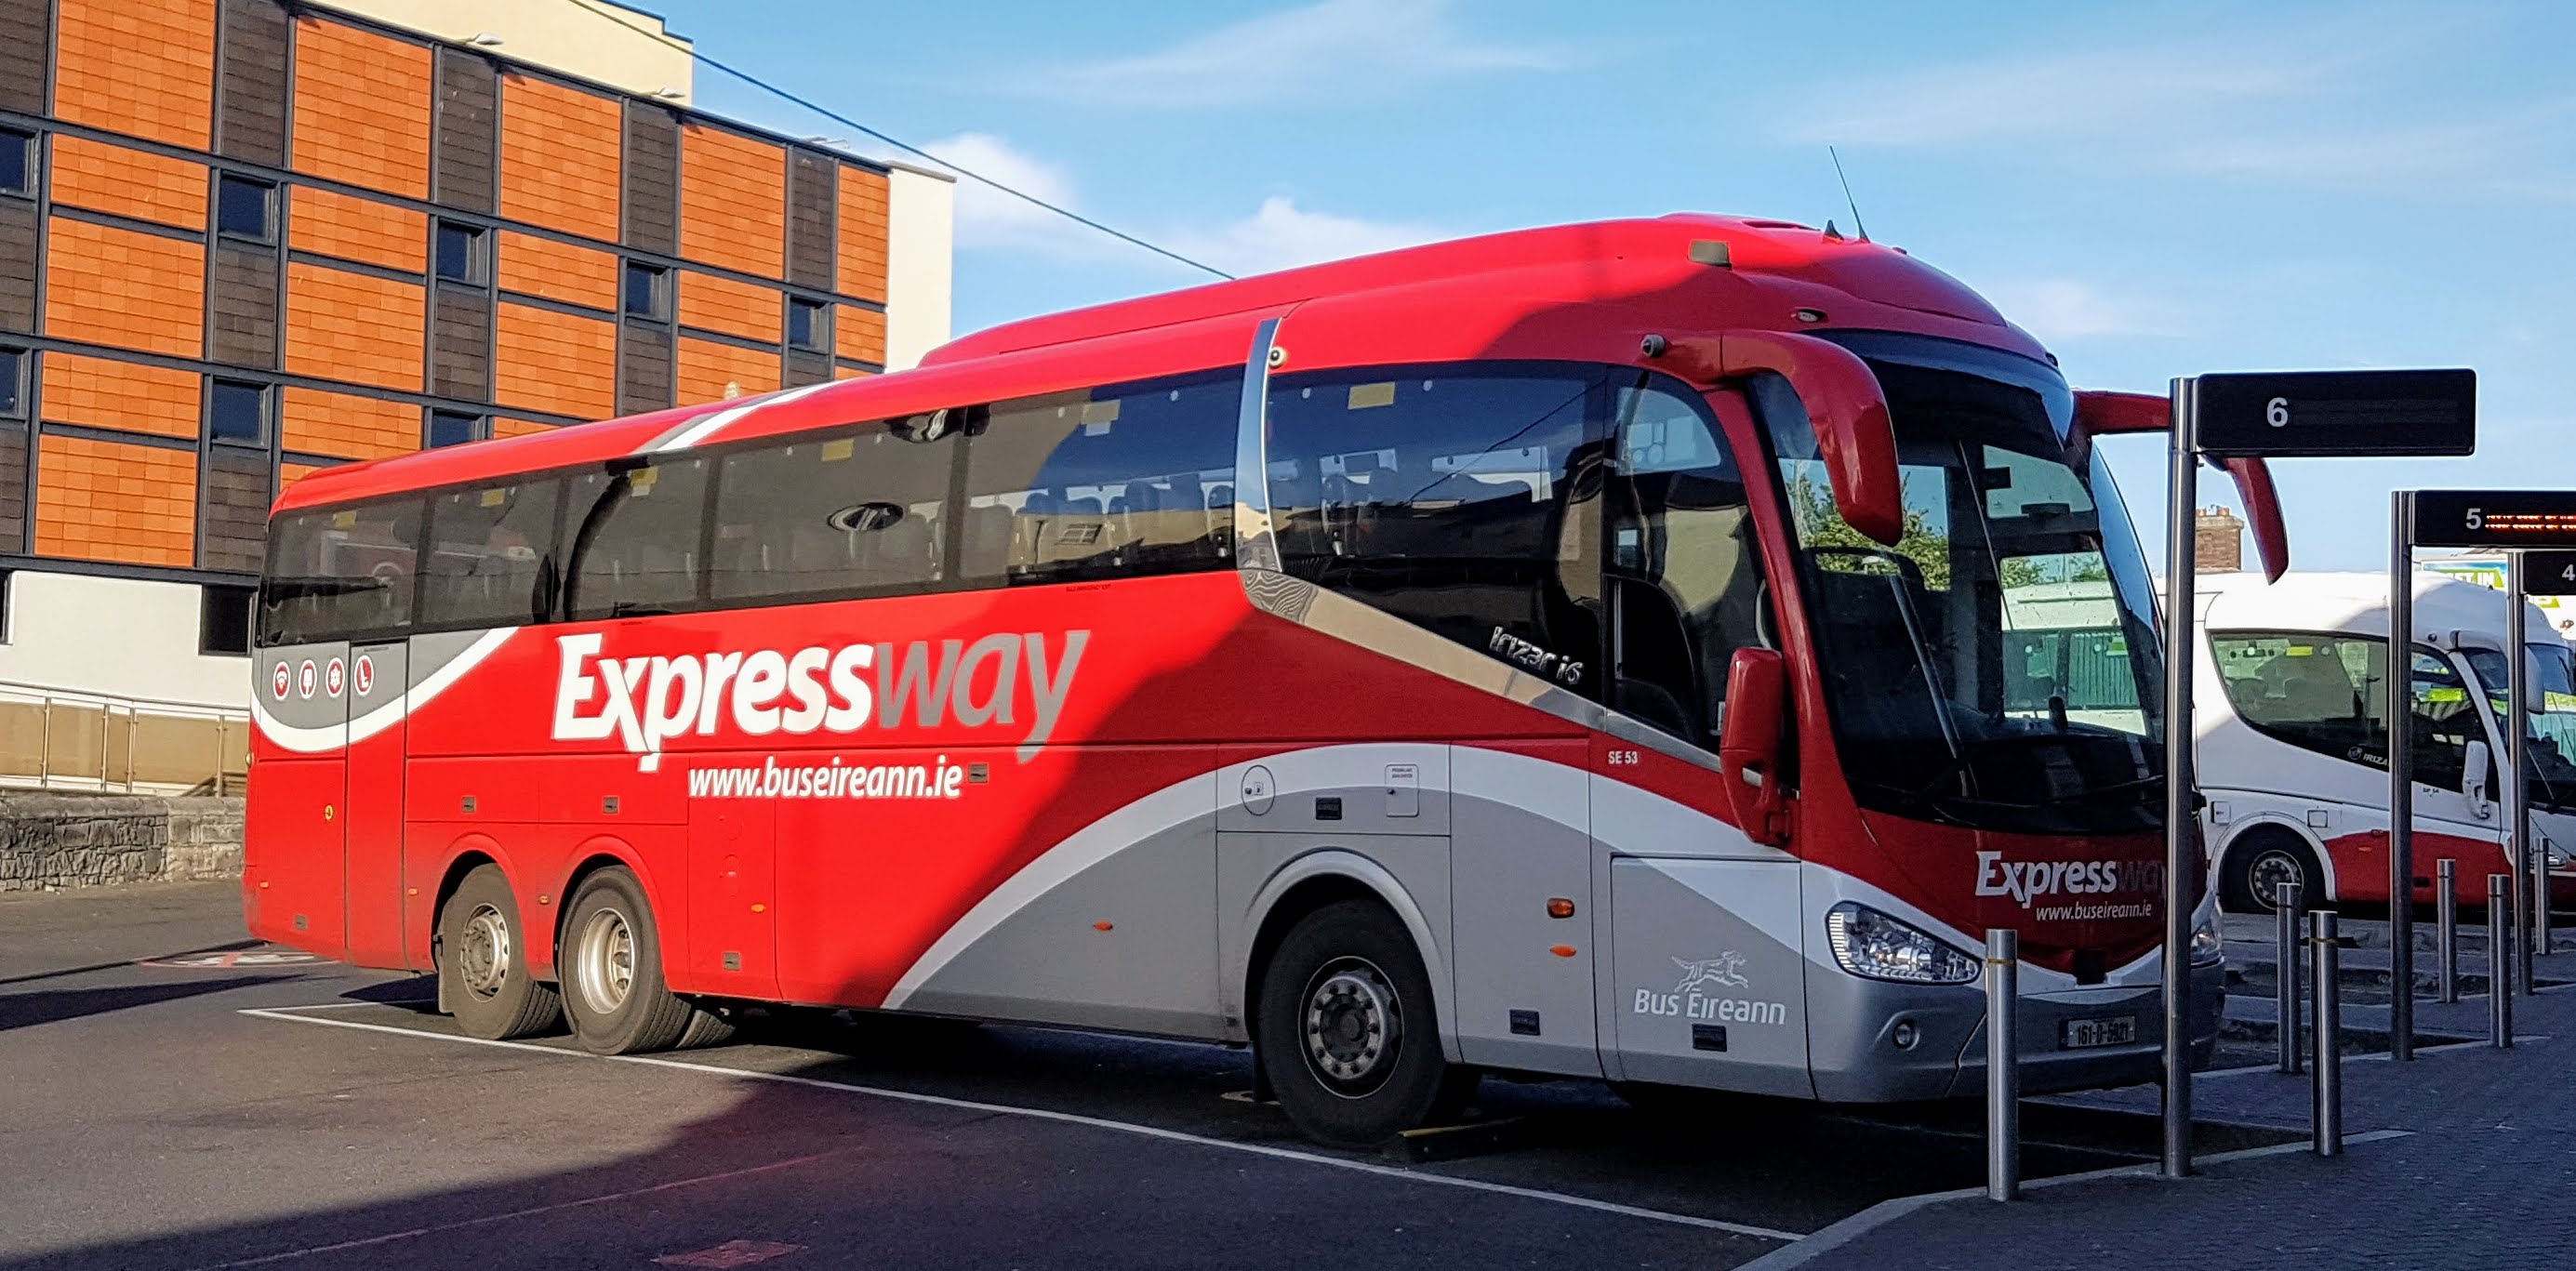 galway-public-transport-news-bus-eireann-route-20-x20-galway-to-dublin-and-dublin-airport